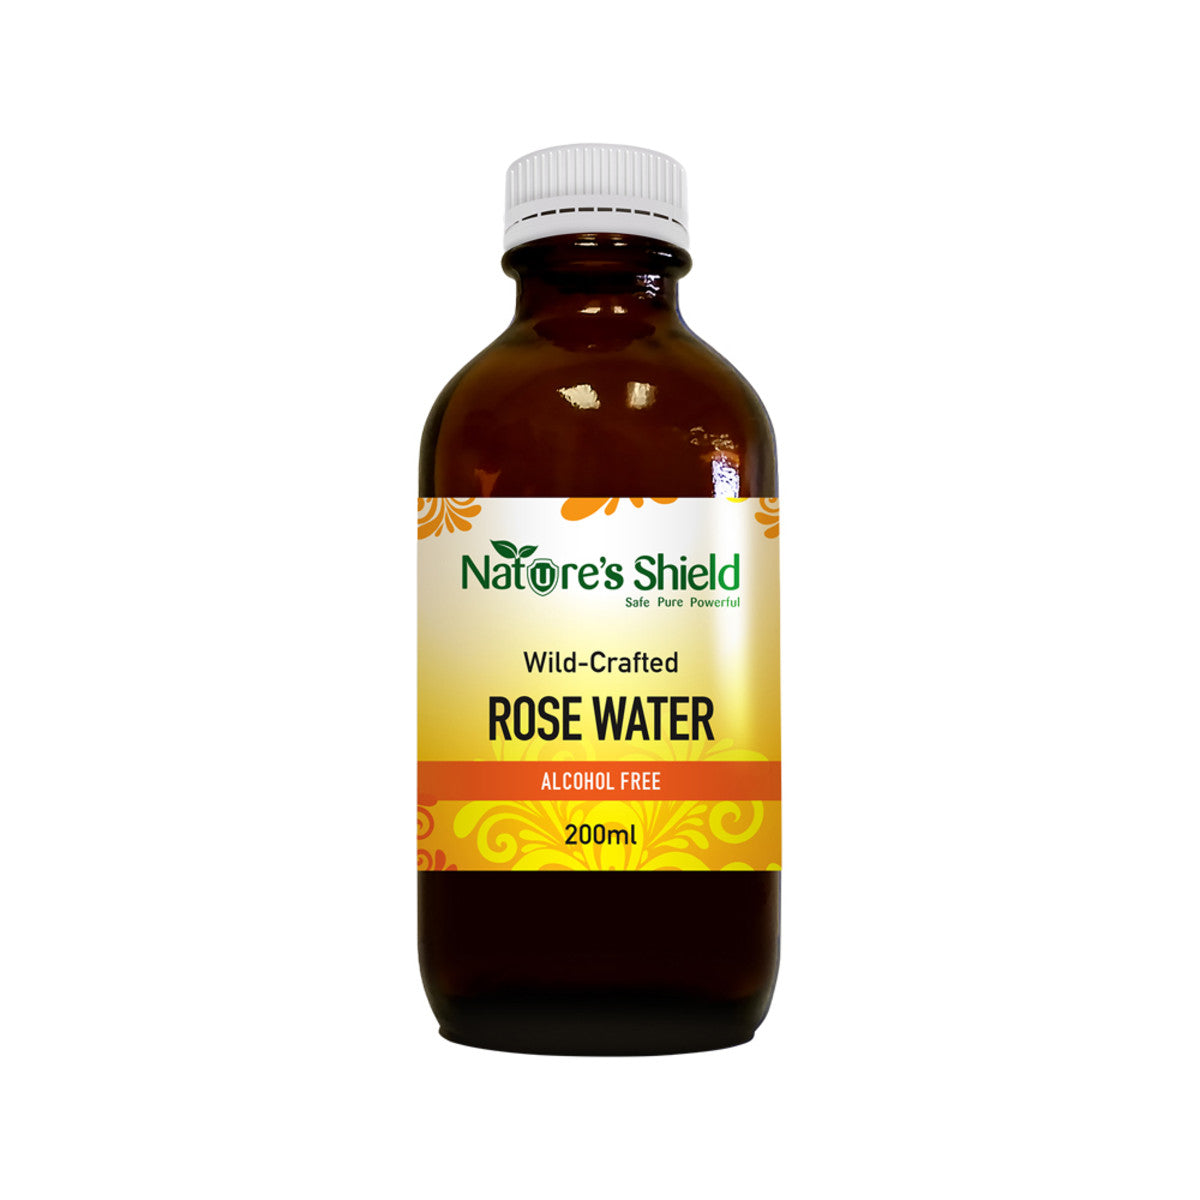 Wild-Crafted Rose Water 200ml